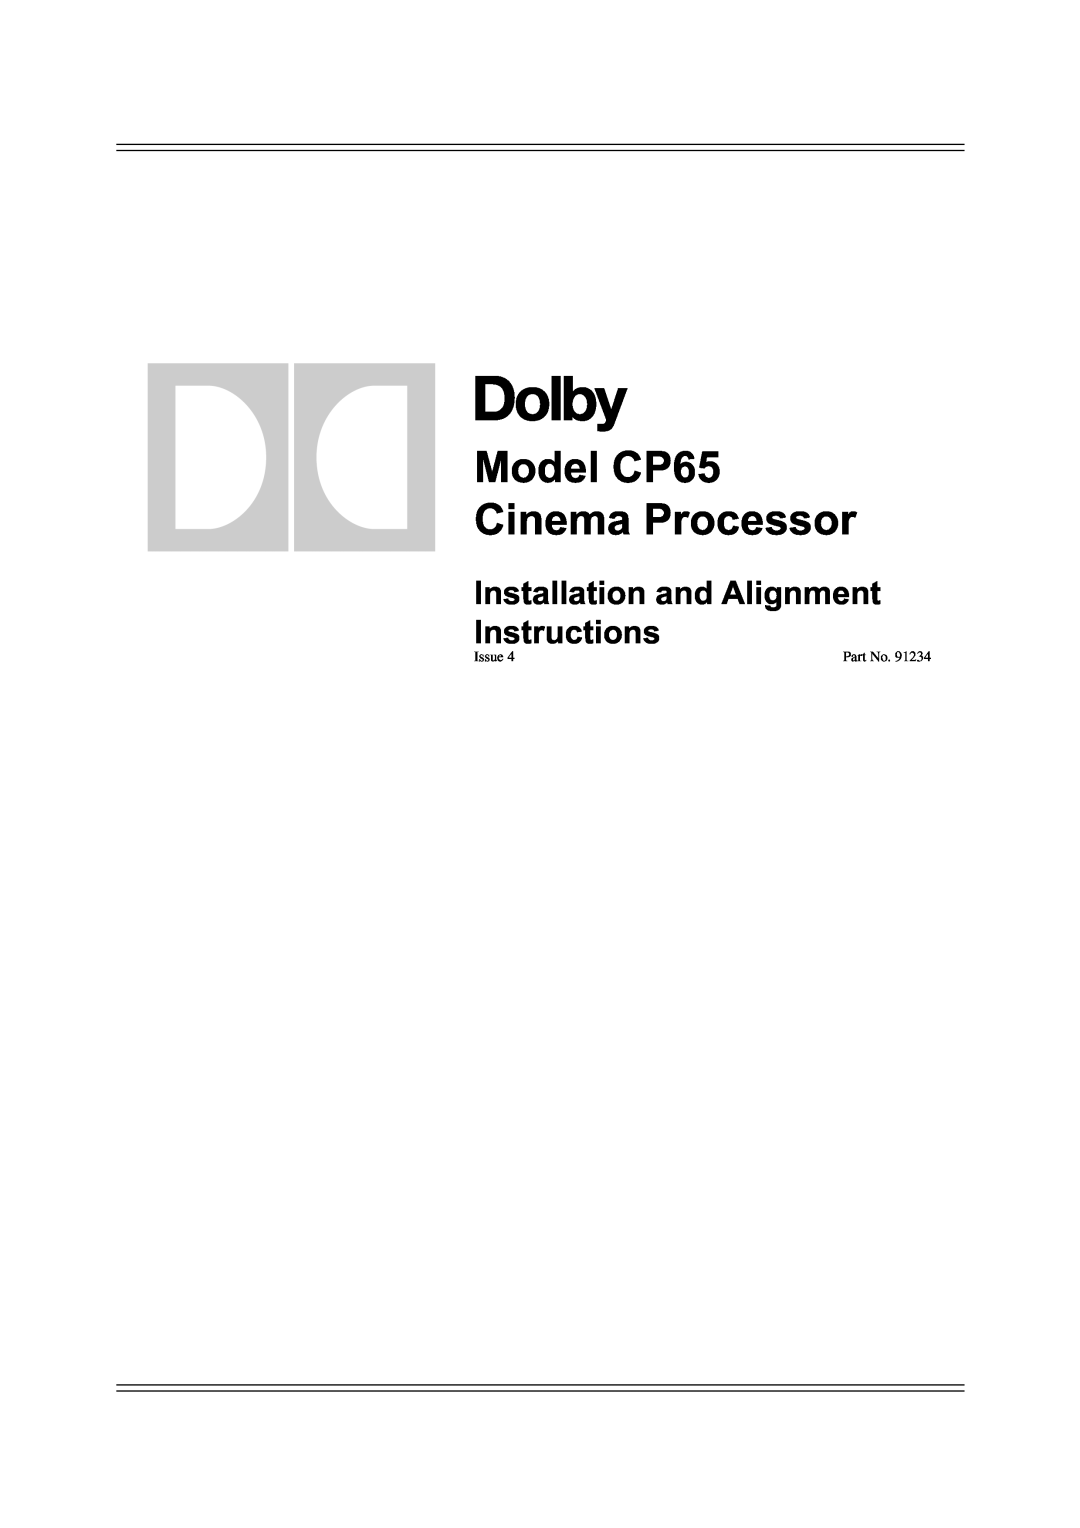 Dolby Laboratories manual Model CP65 Cinema Processor, Installation and Alignment Instructions 